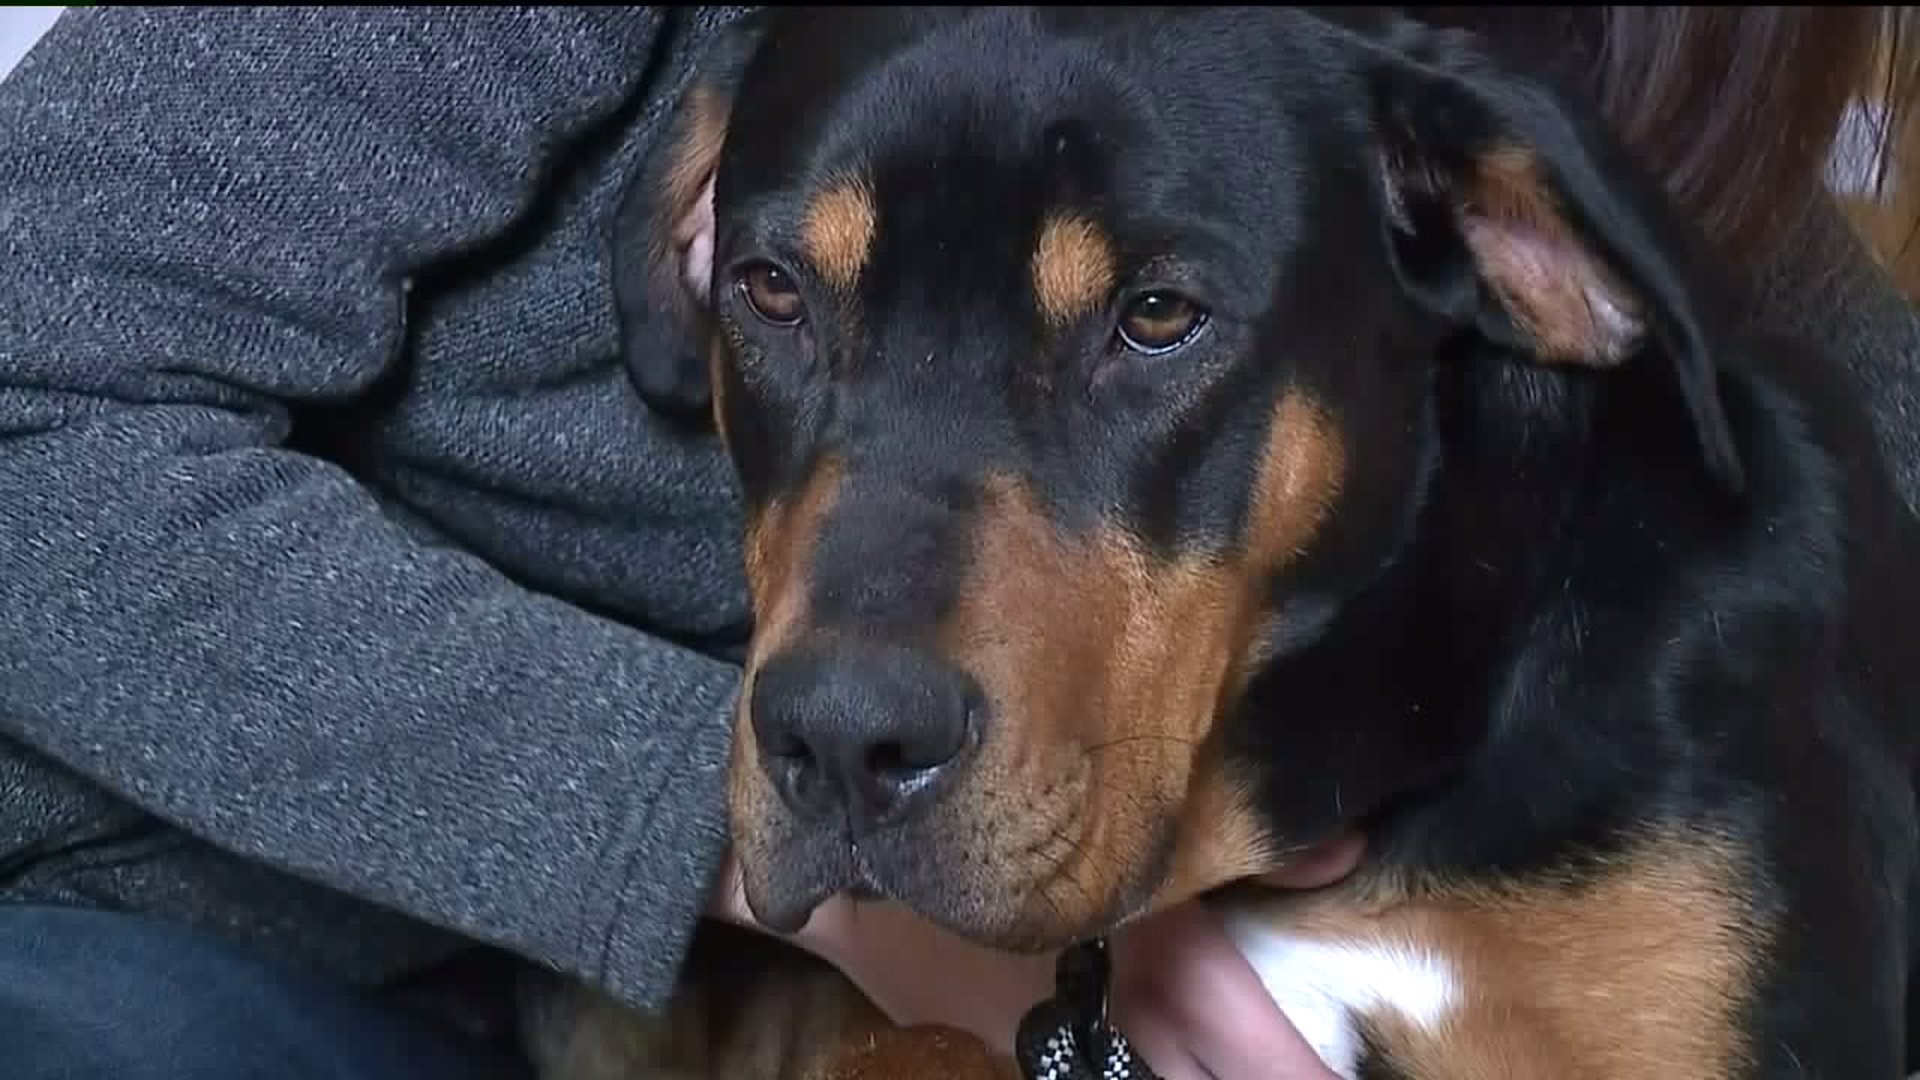 Owner Thankful After Finding Dog Lost in Crash